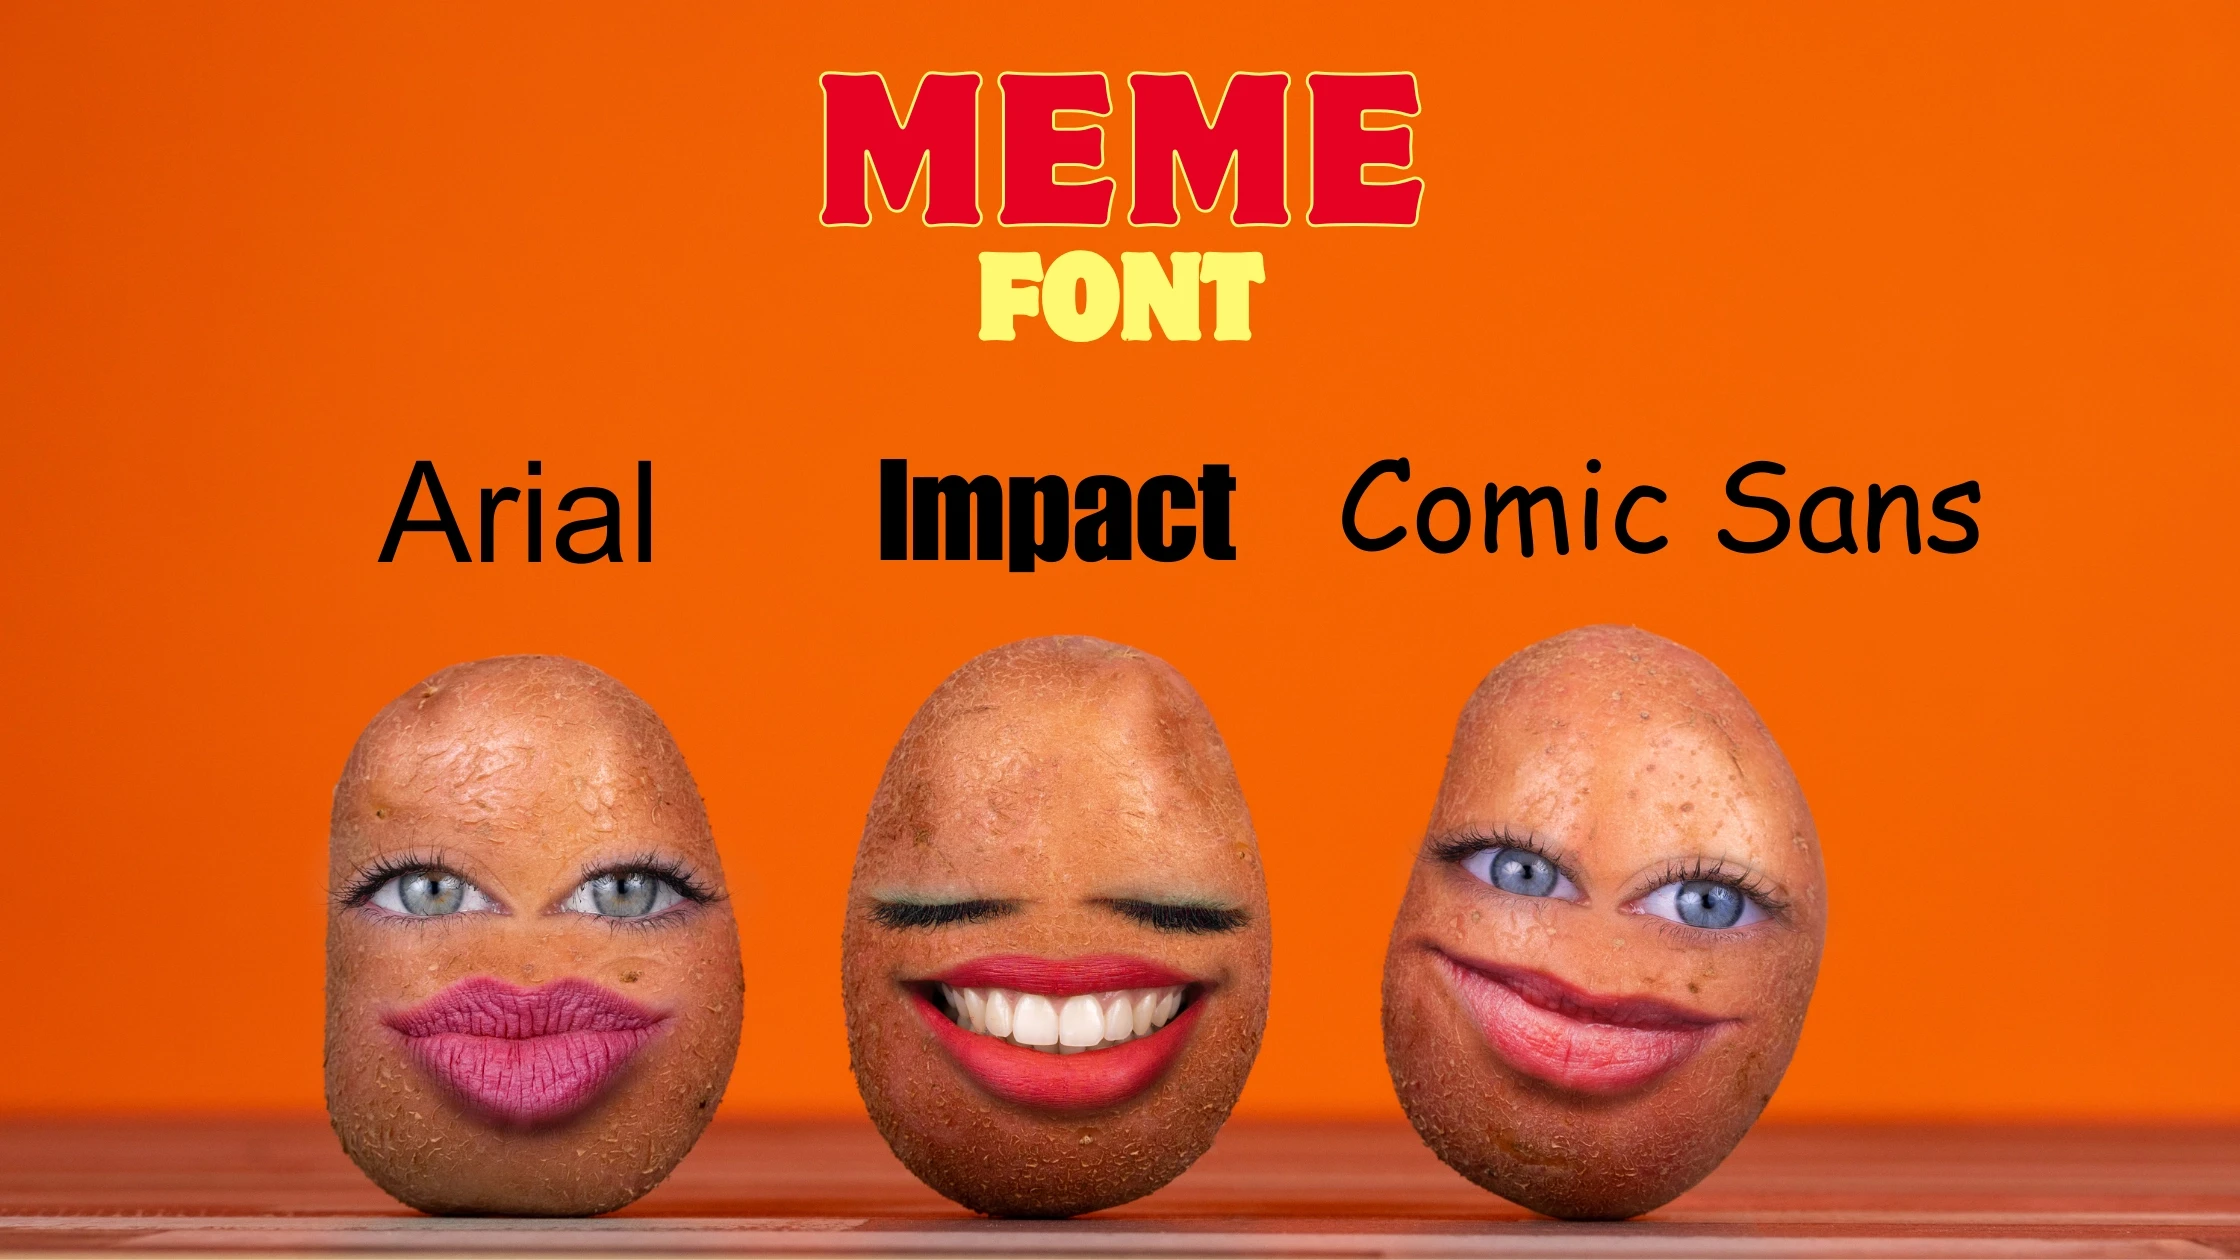 What Font Is Used For Memes?